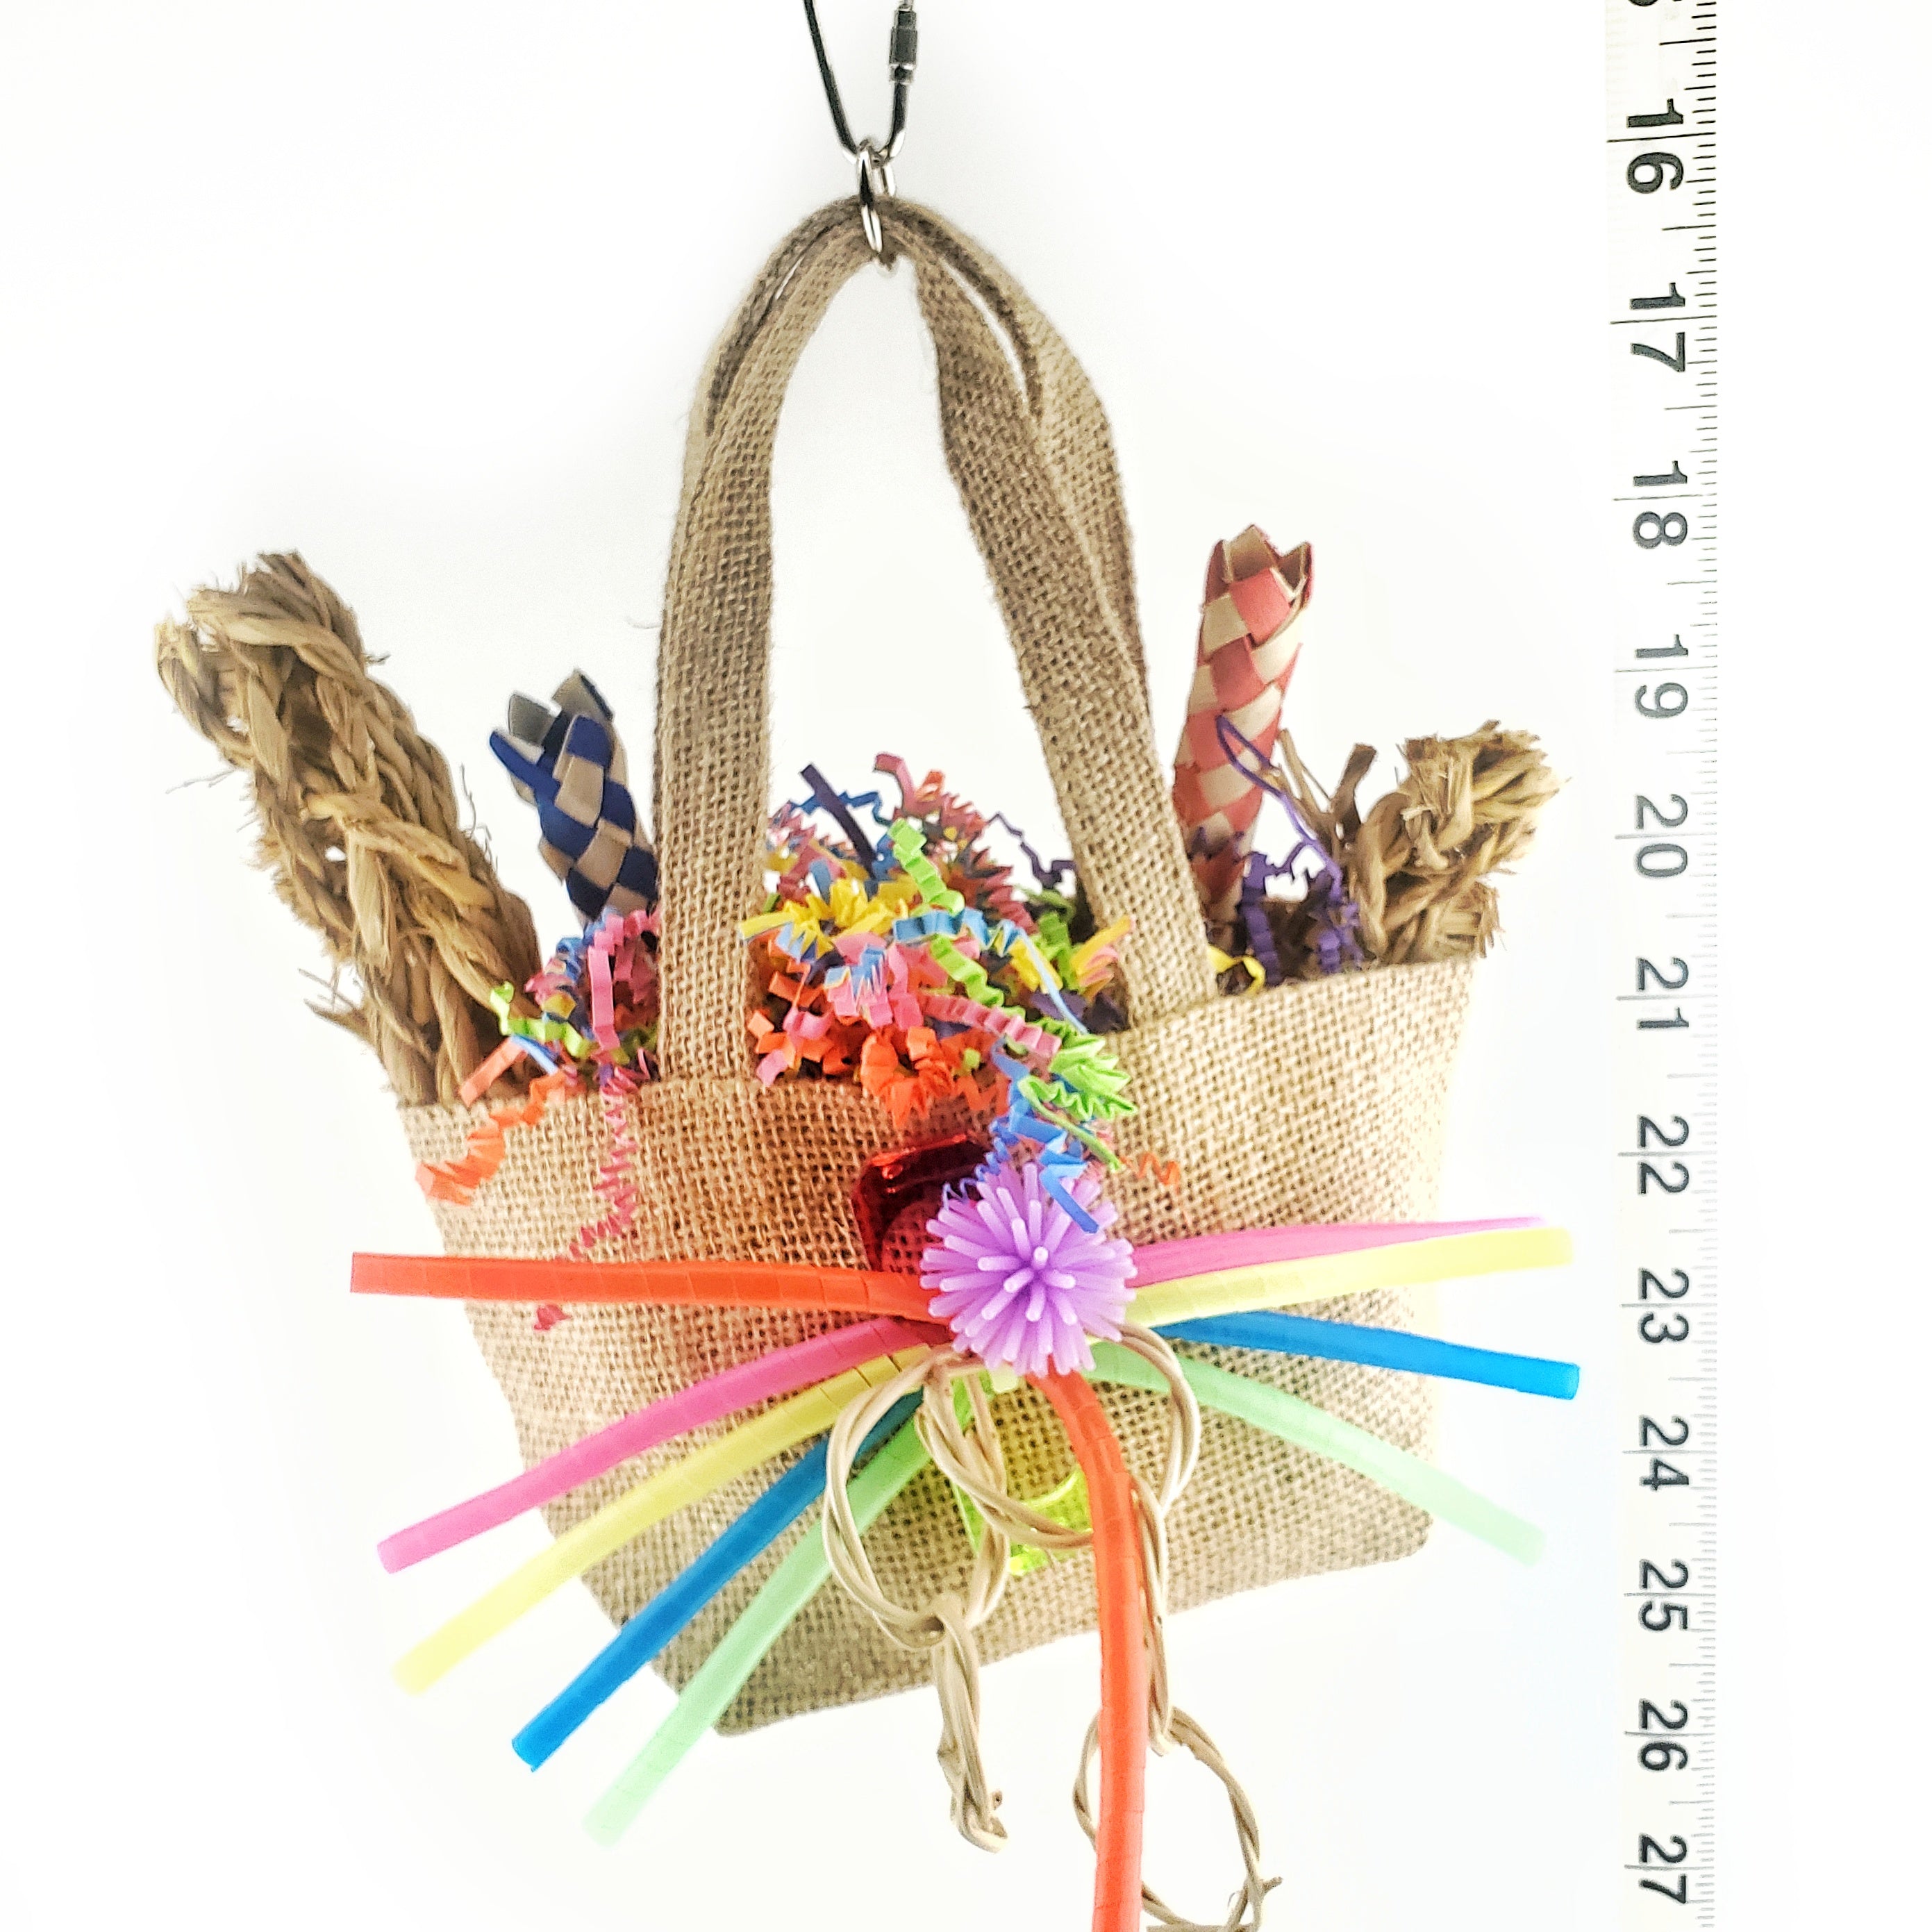 Foraging Treasure Tote by Cheep Thrills Bird Toys